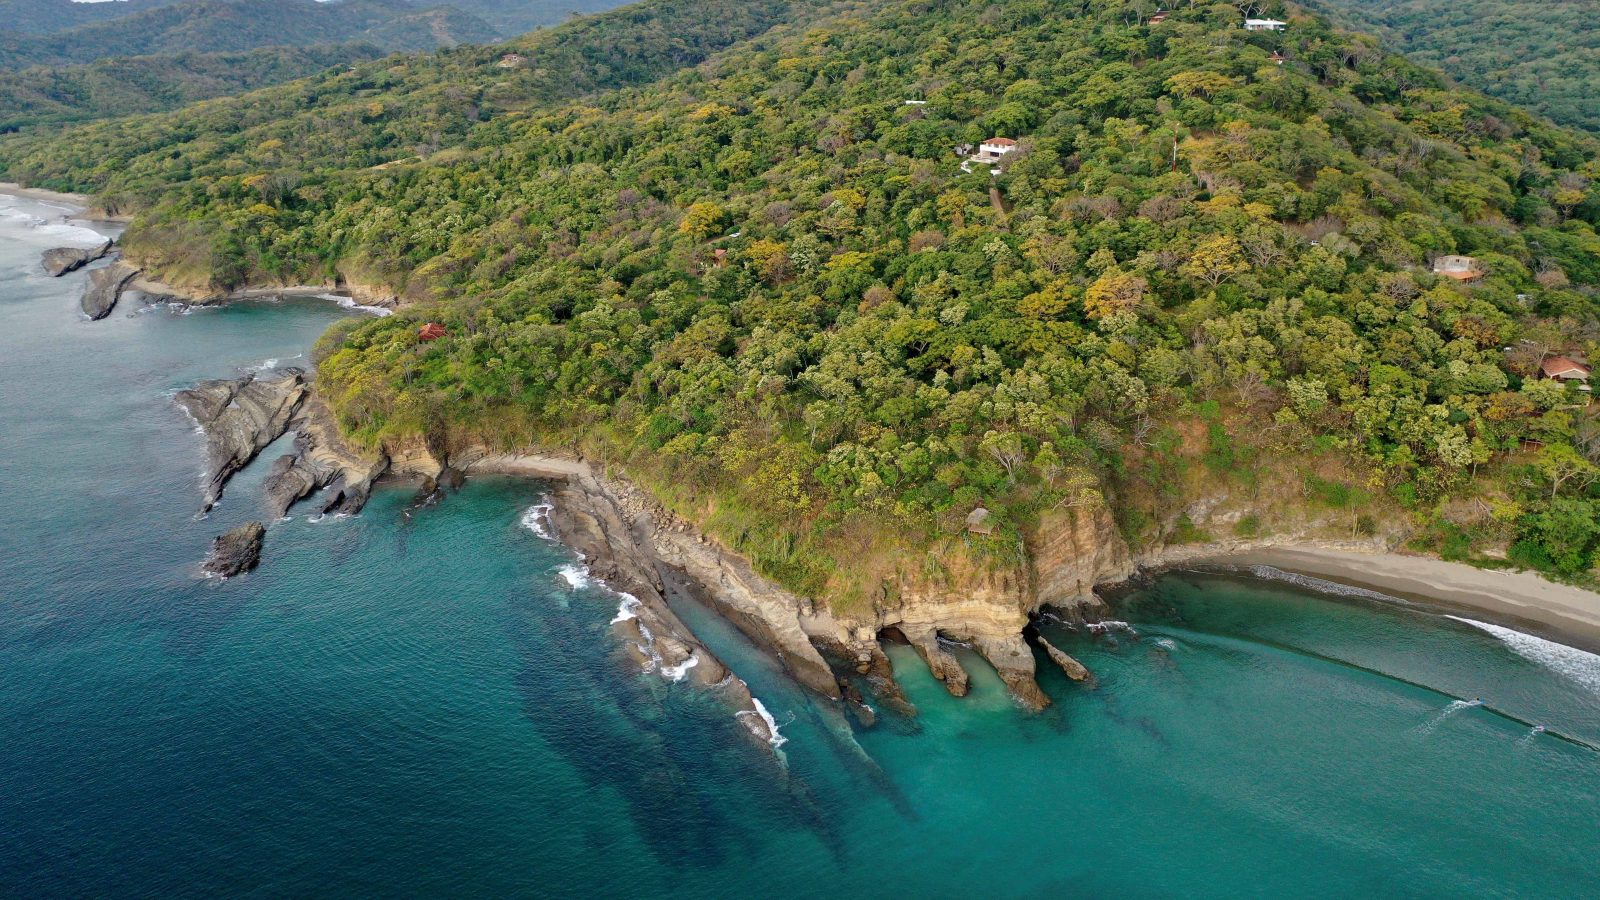 There are many beautiful coastlines and beaches in Nicaragua.